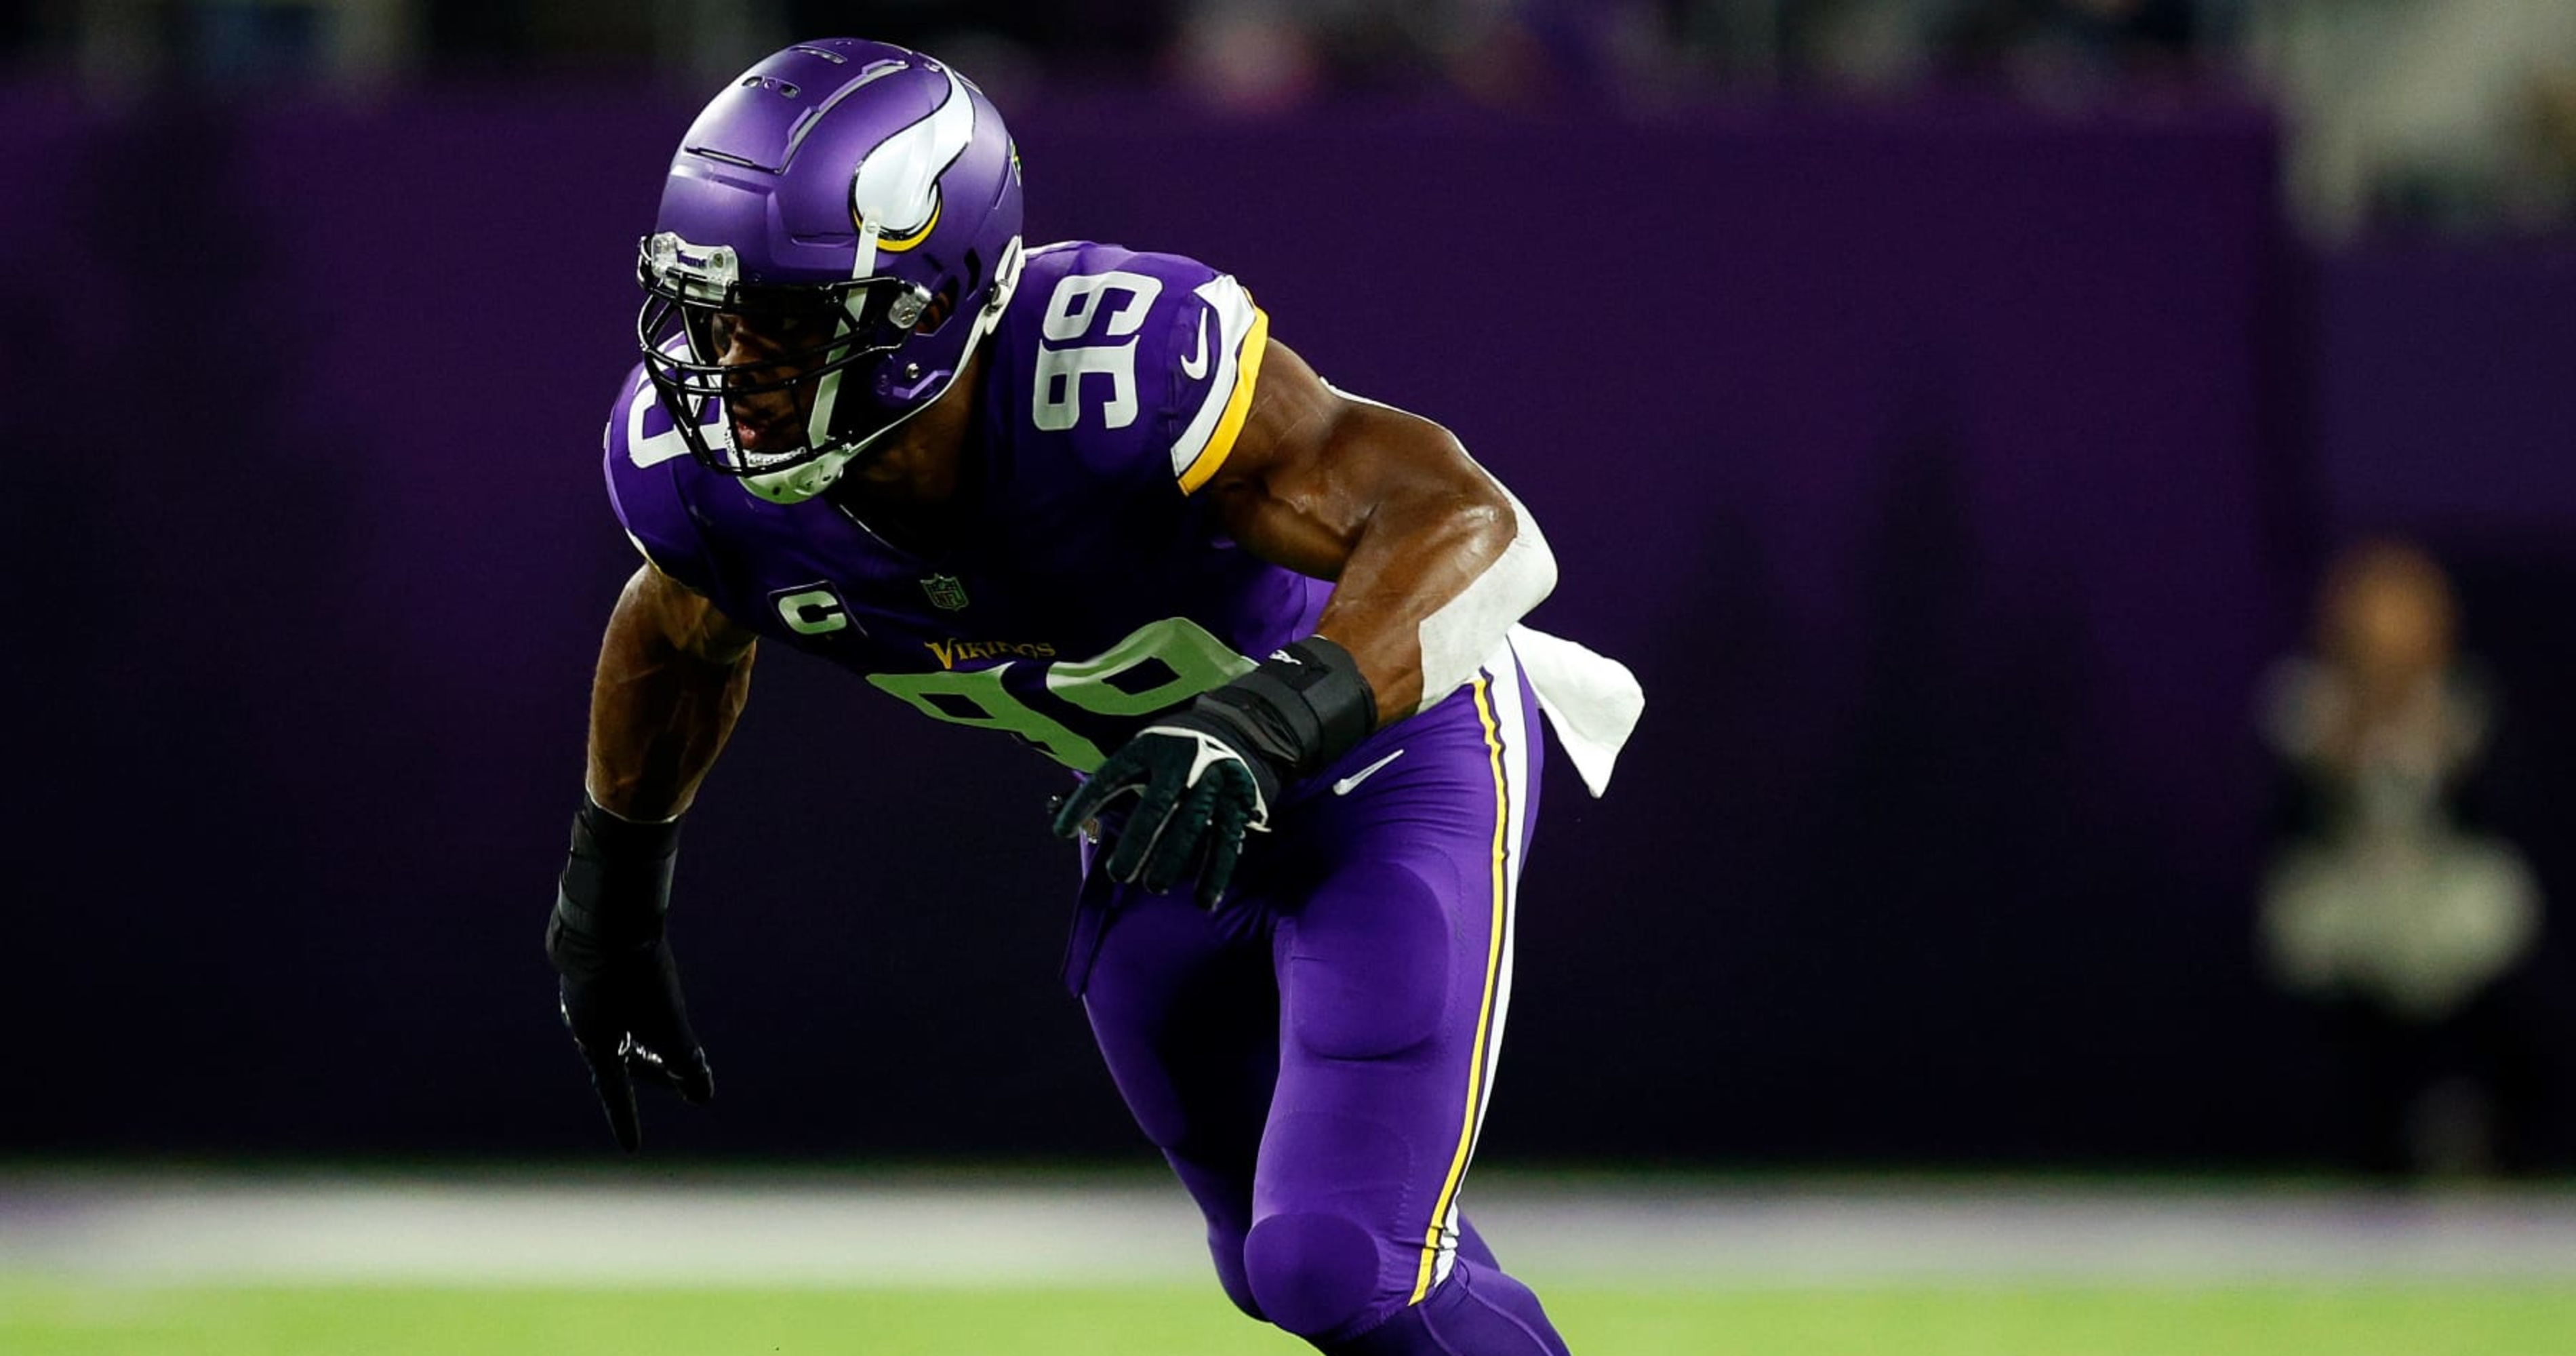 Vikings Rumors: 'Almost No Chance' of Danielle Hunter Trade After Kirk Cousins Injury